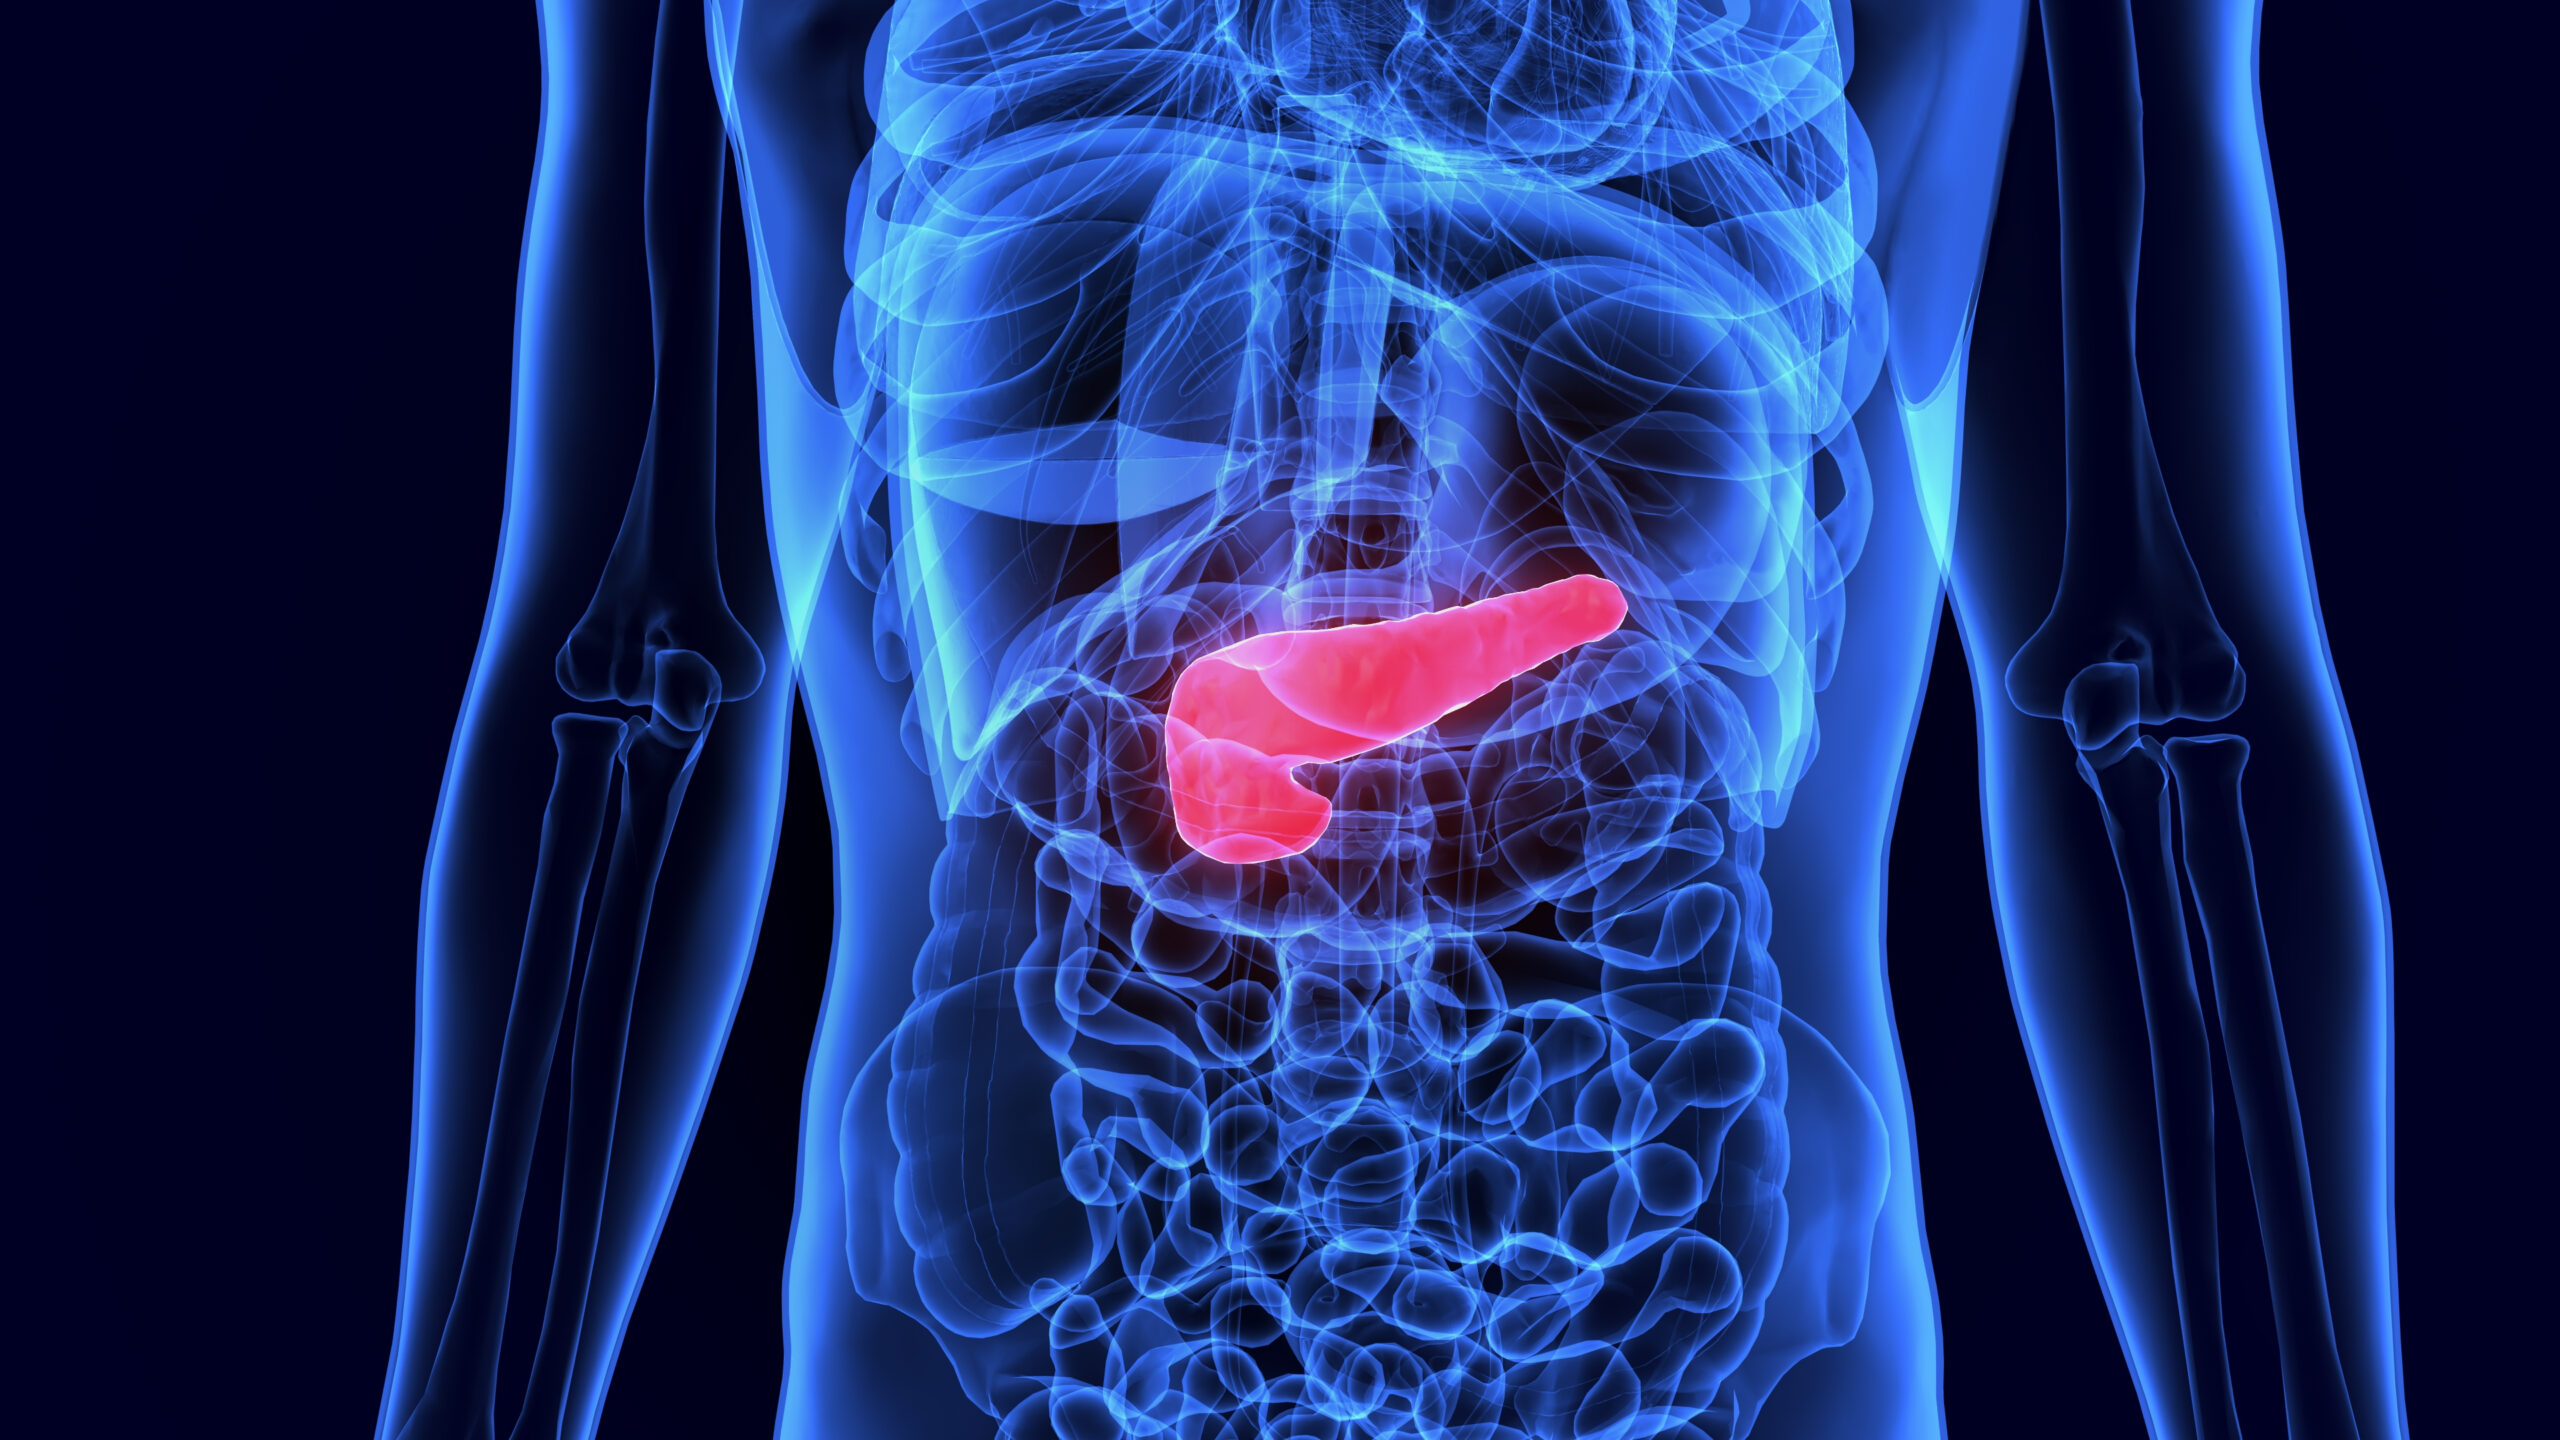 Pancreatitis: What Is, Symptoms, Causes, Diagnosis and Treatment